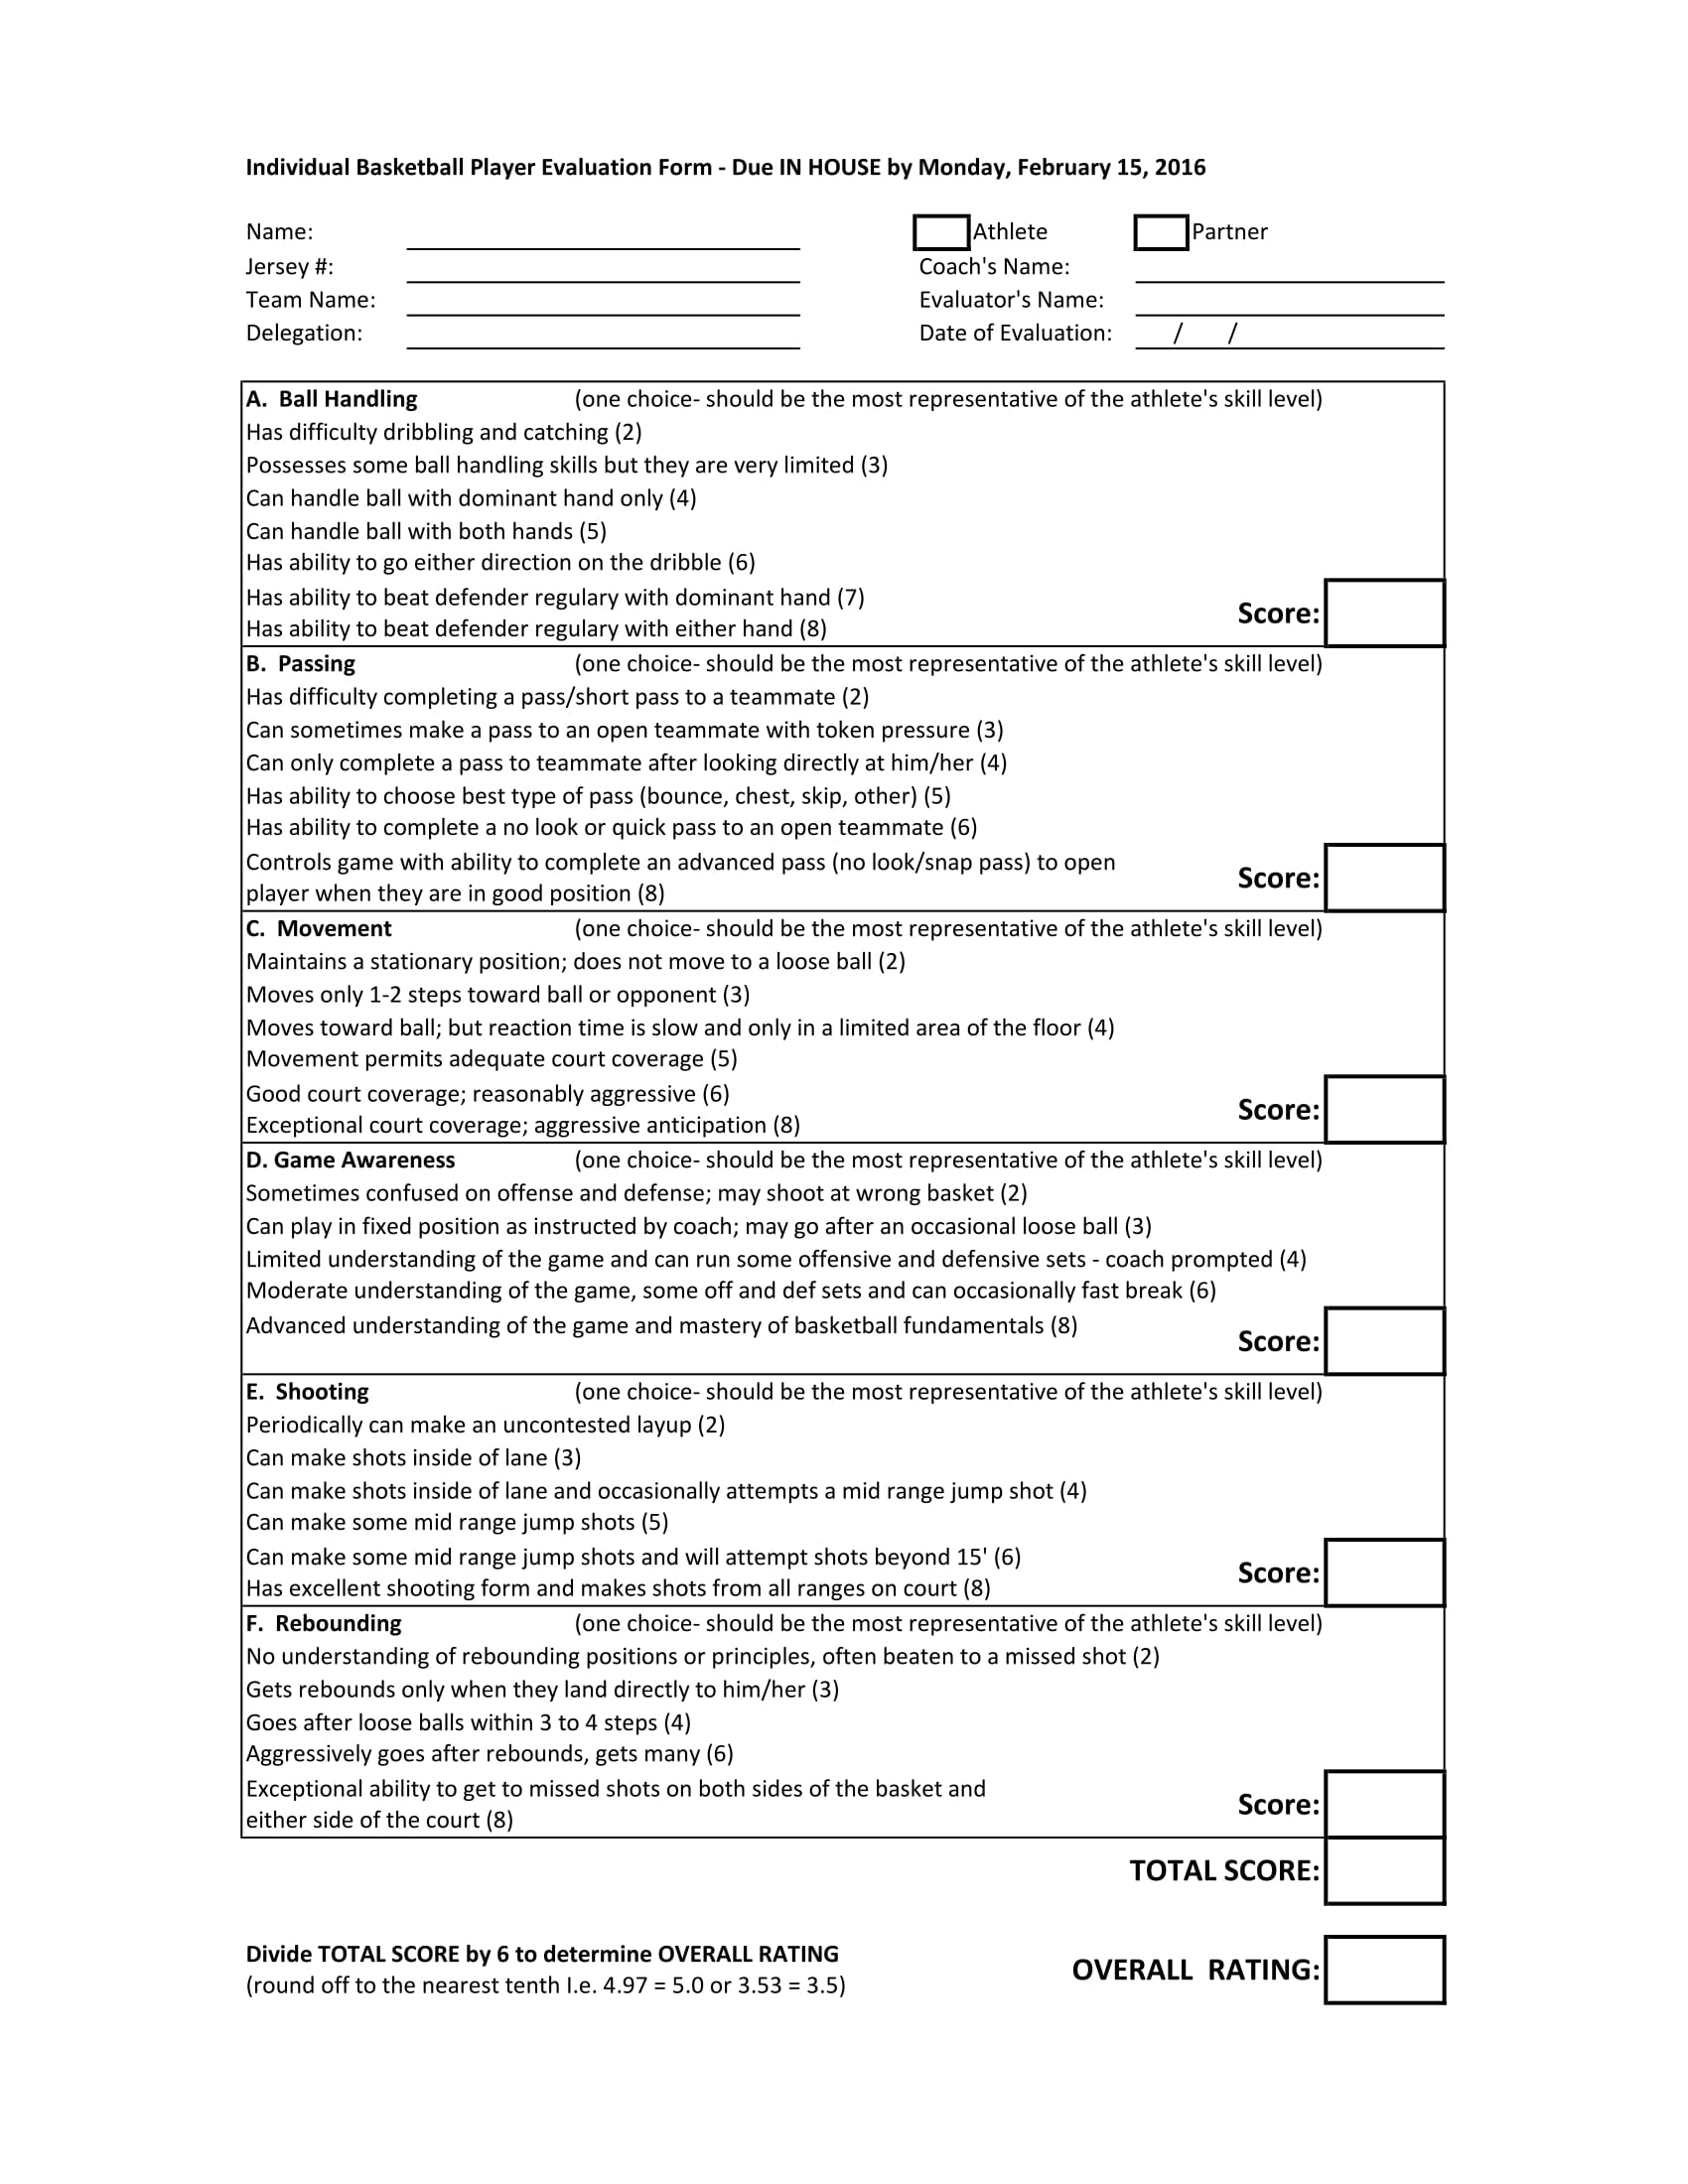 FREE 5 Varieties Of Sports Evaluation Forms In PDF